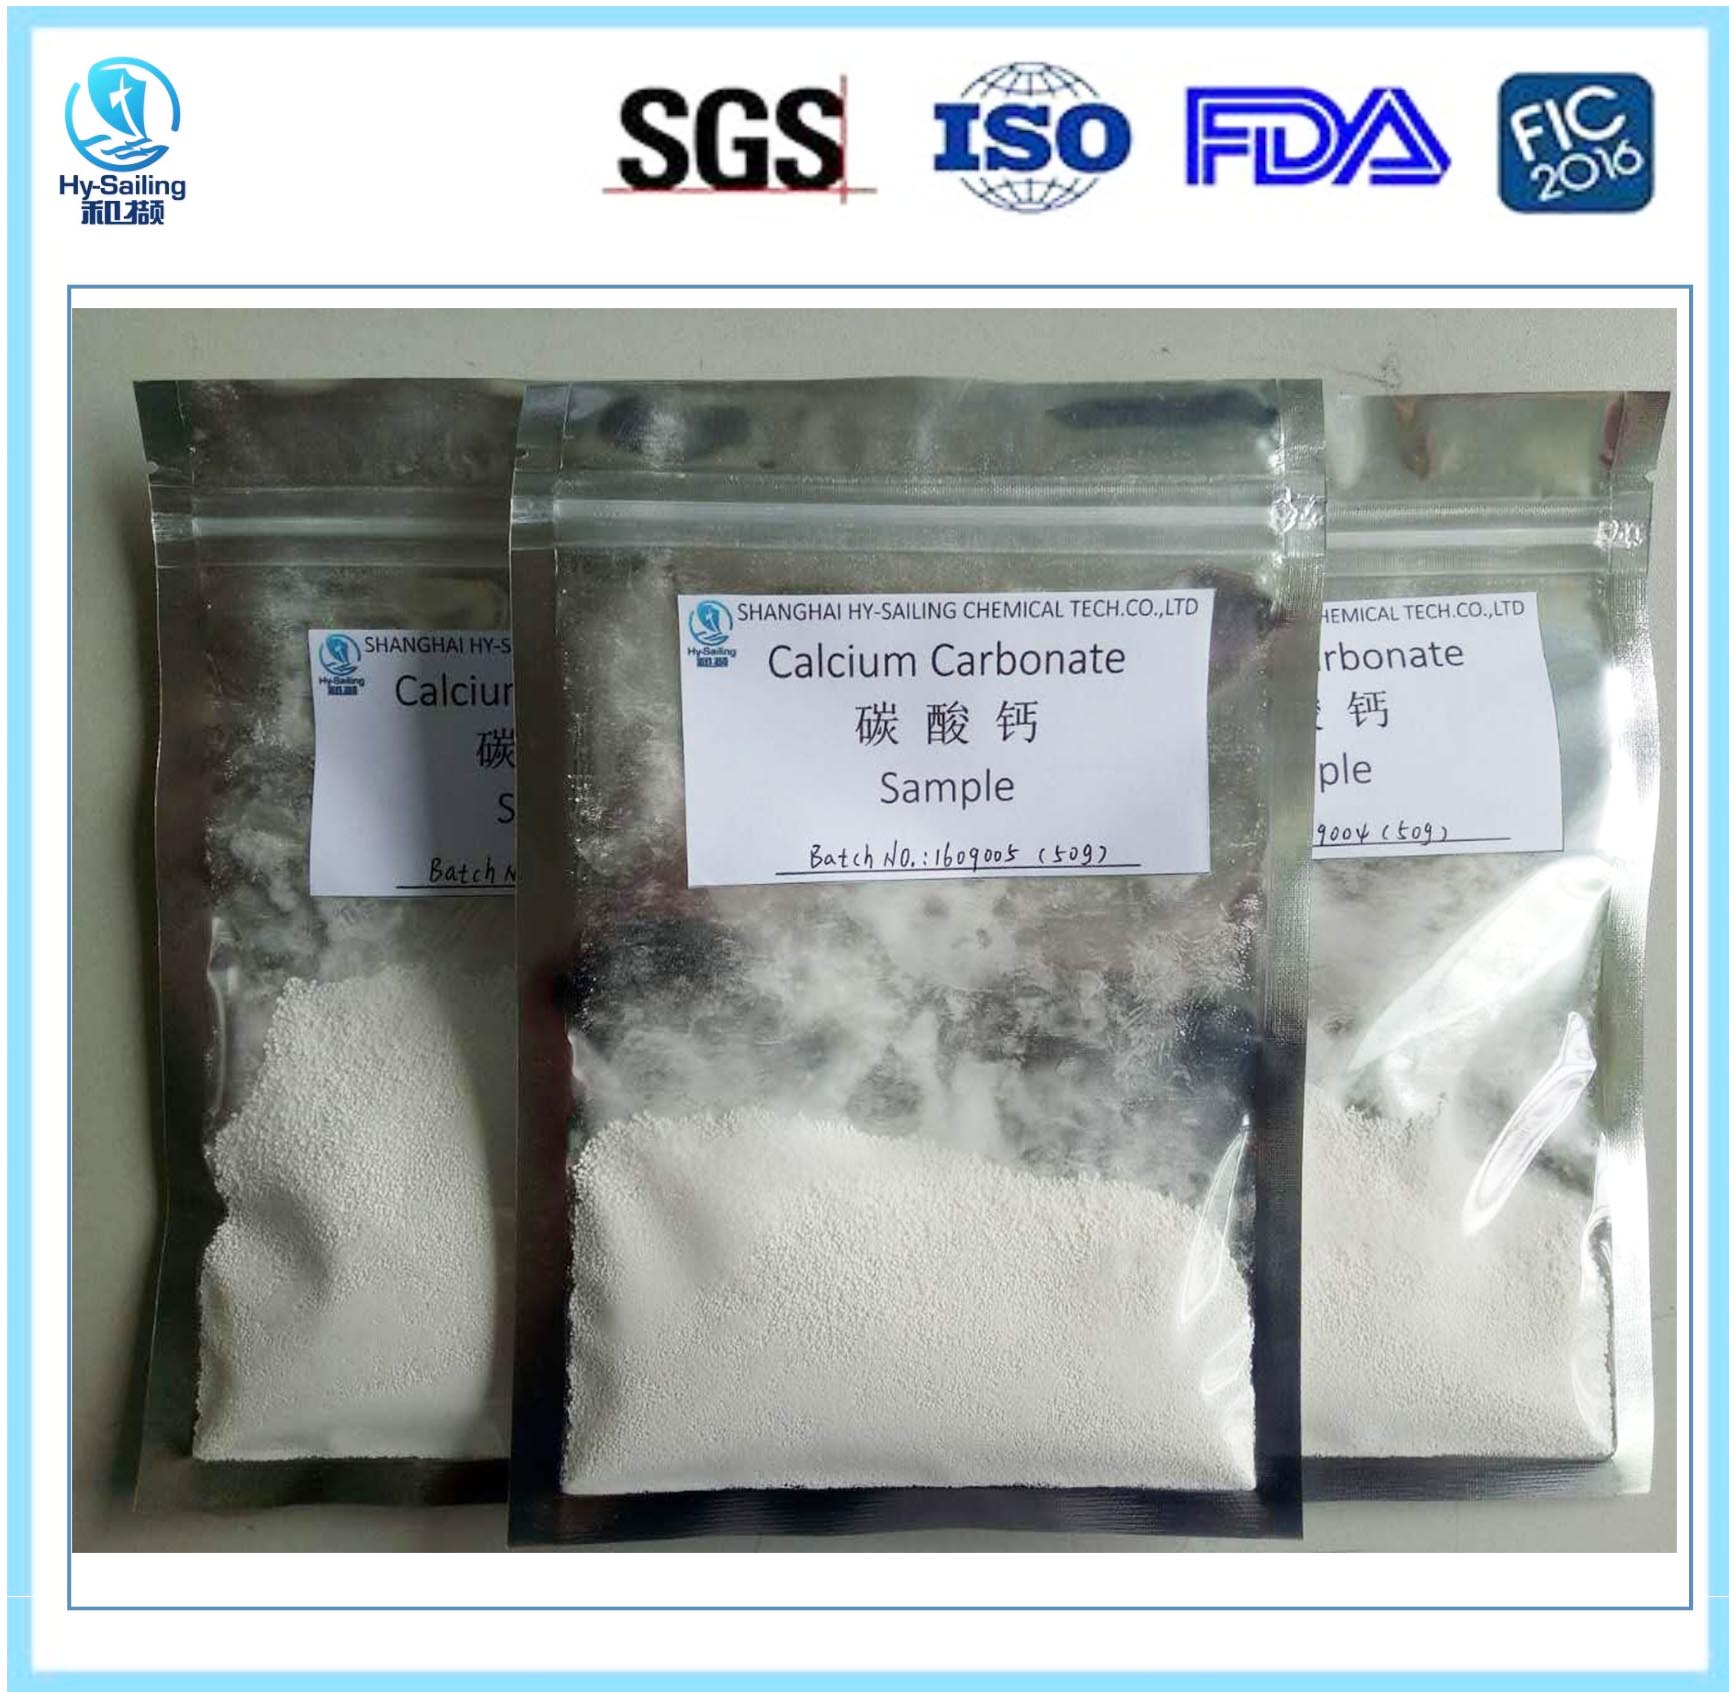 where can i buy kaolin and calcium carbonate tablets